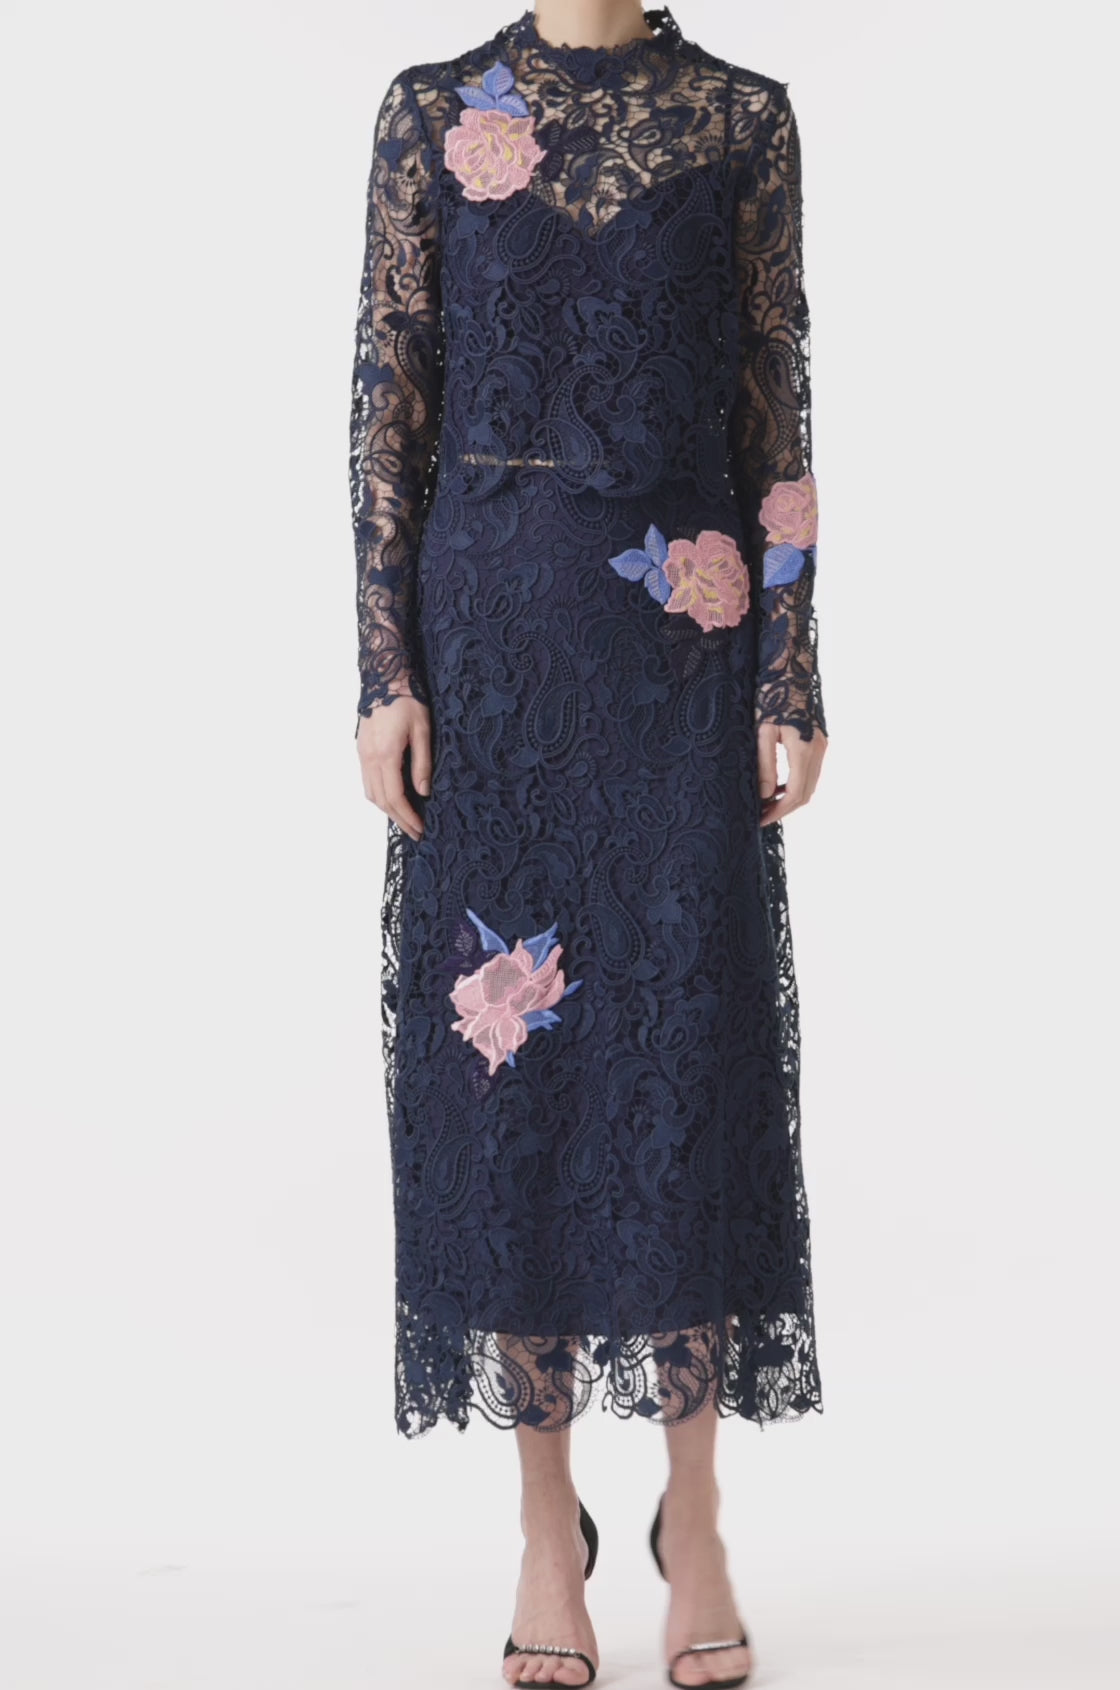 Monique Lhuillier midi-length navy guipure lace skirt with pink lace flowers.